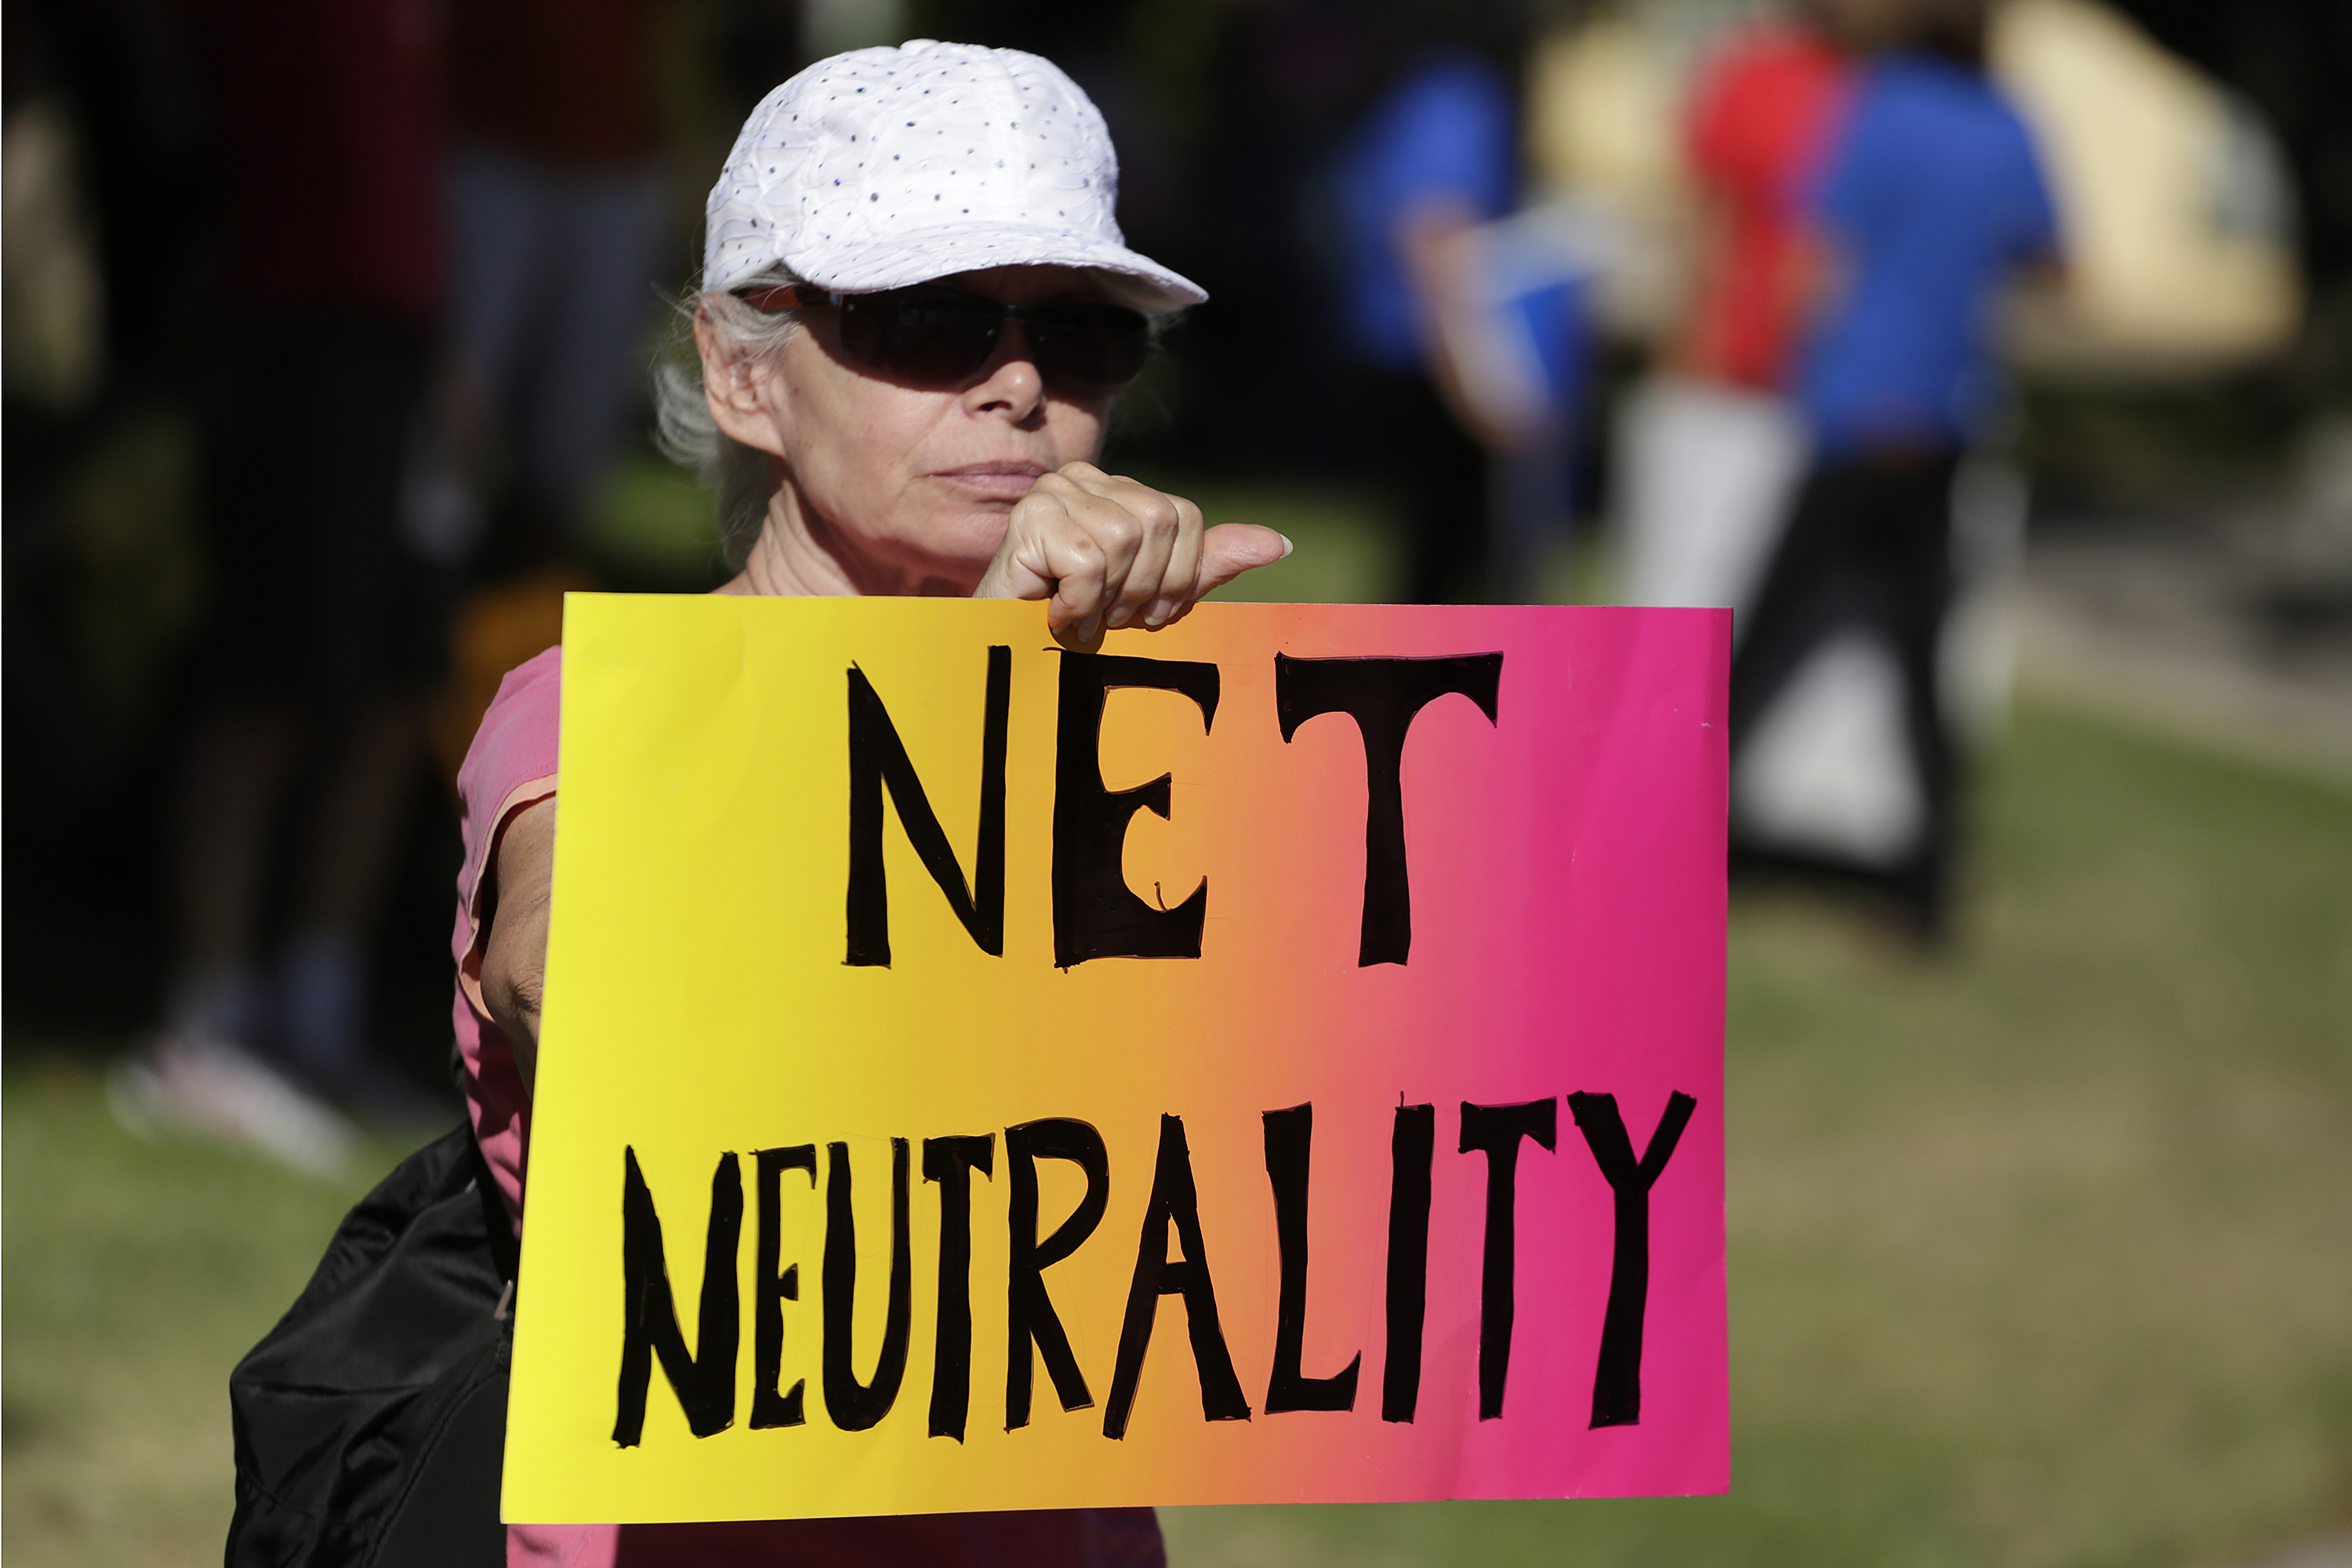 A protester attends a net-neutrality rally in Los Angeles on July 23, 2014 (Jonathan Alcorn—Reuters)